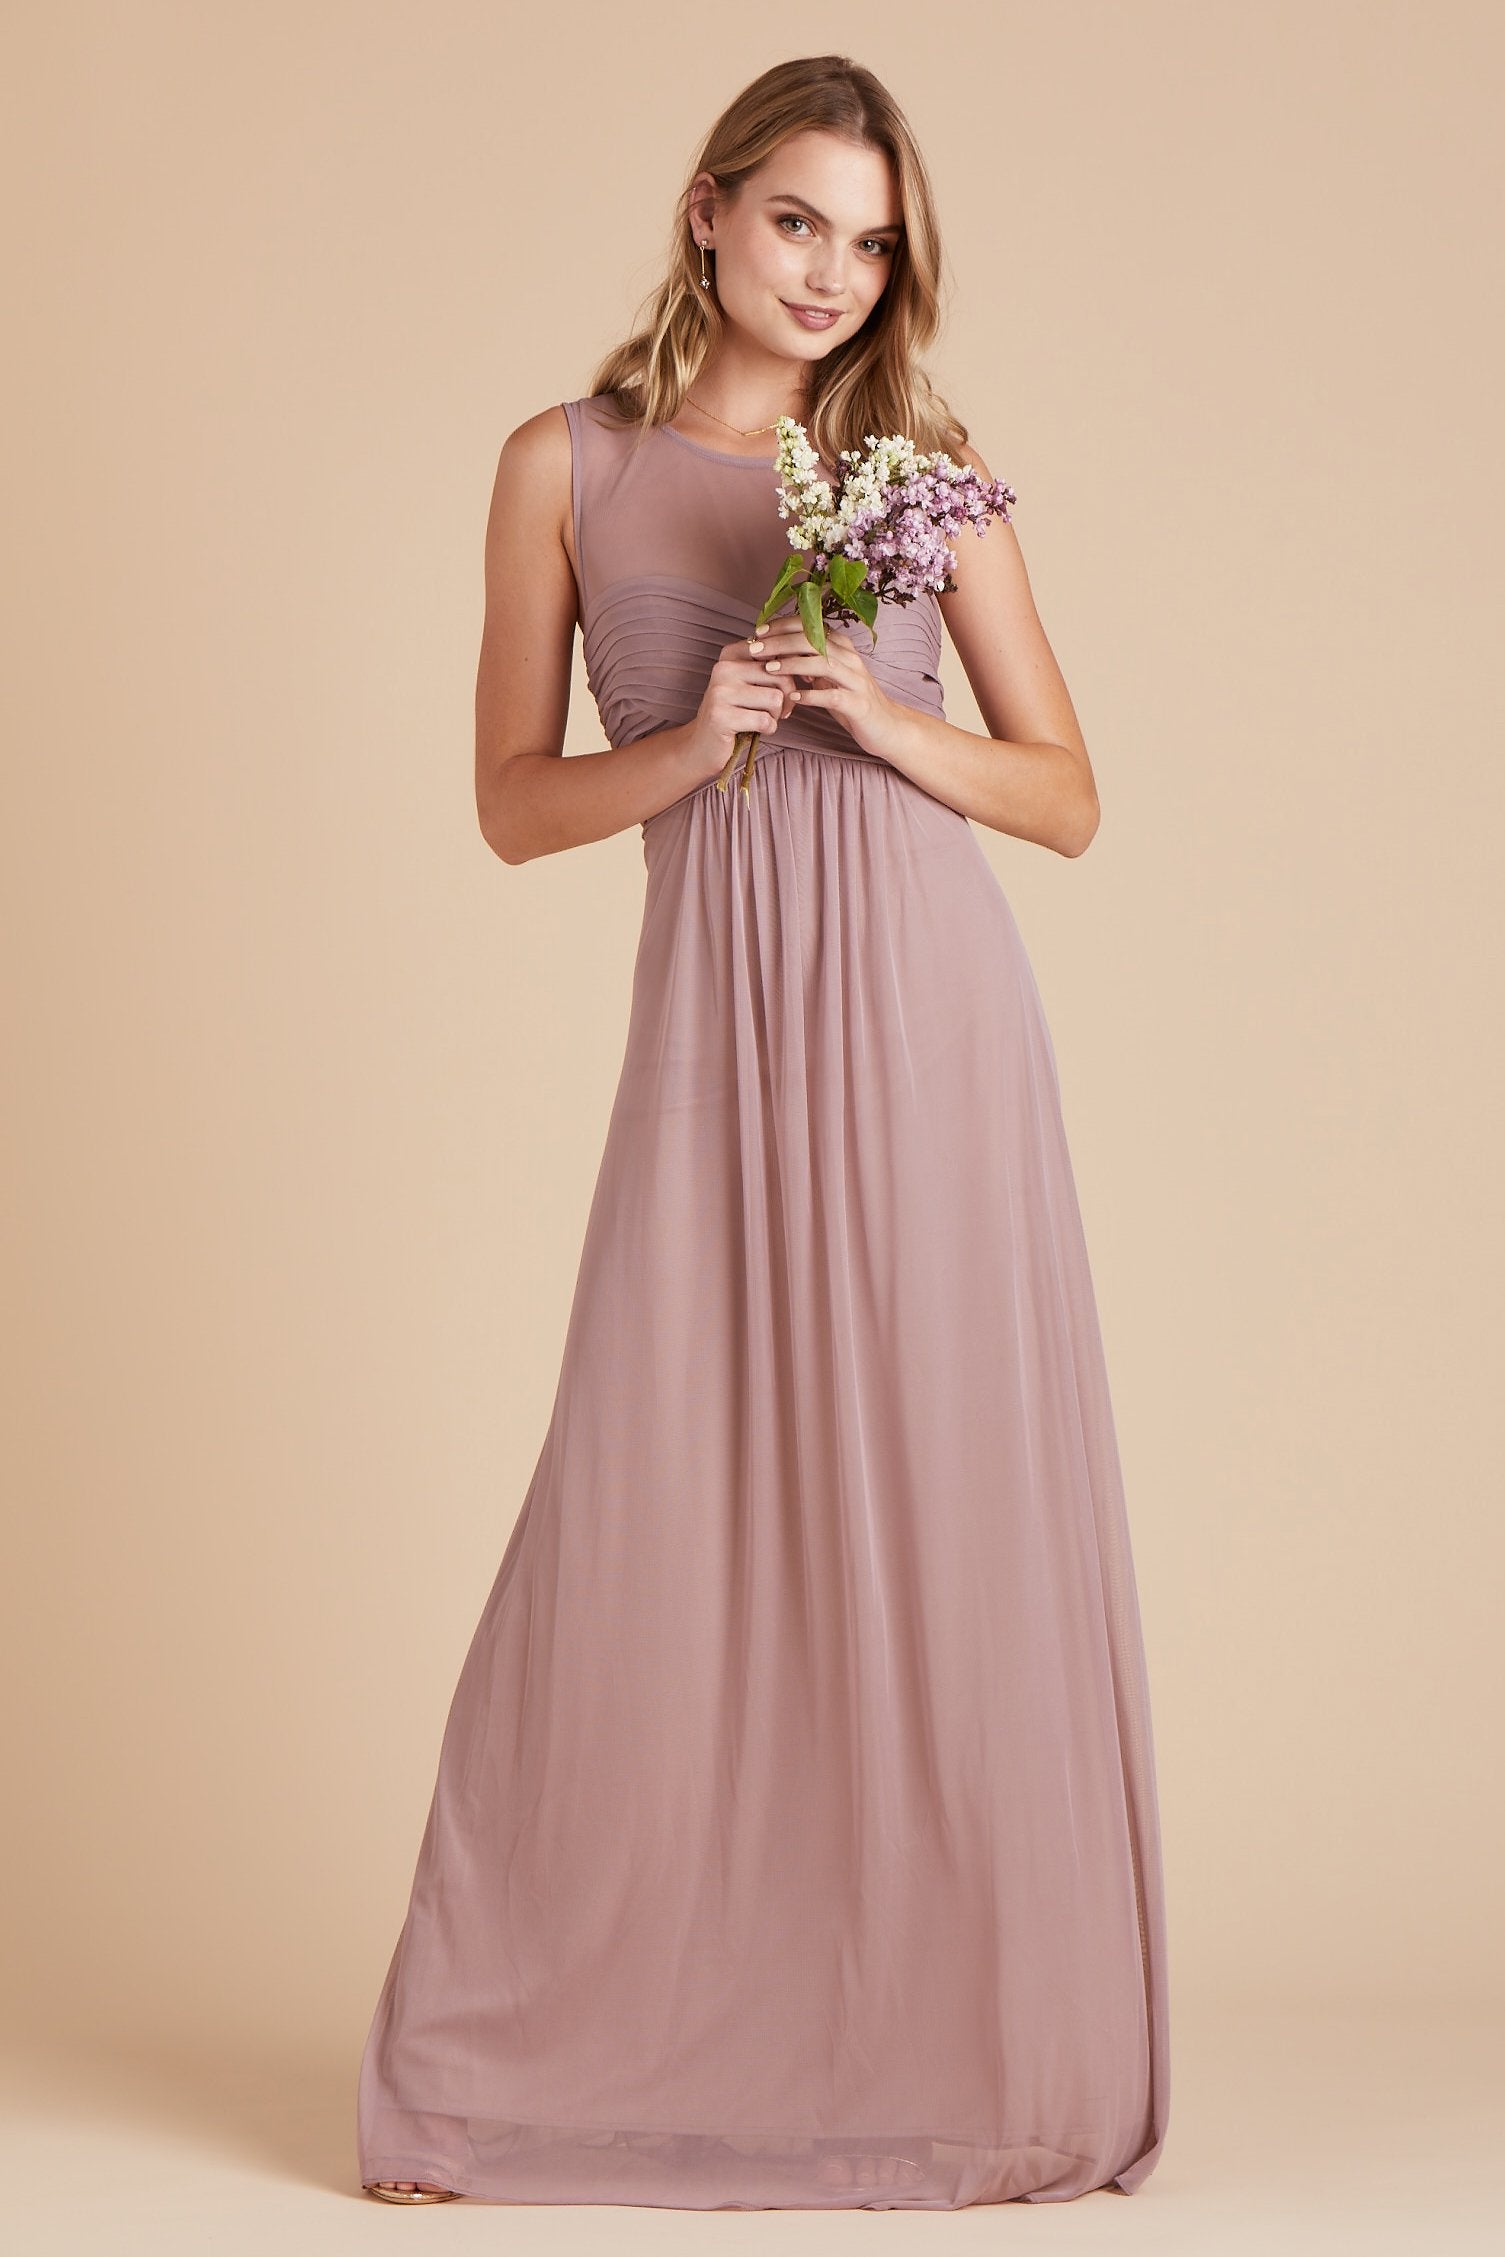 Ryan bridesmaid dress in mauve chiffon by Birdy Grey, front view